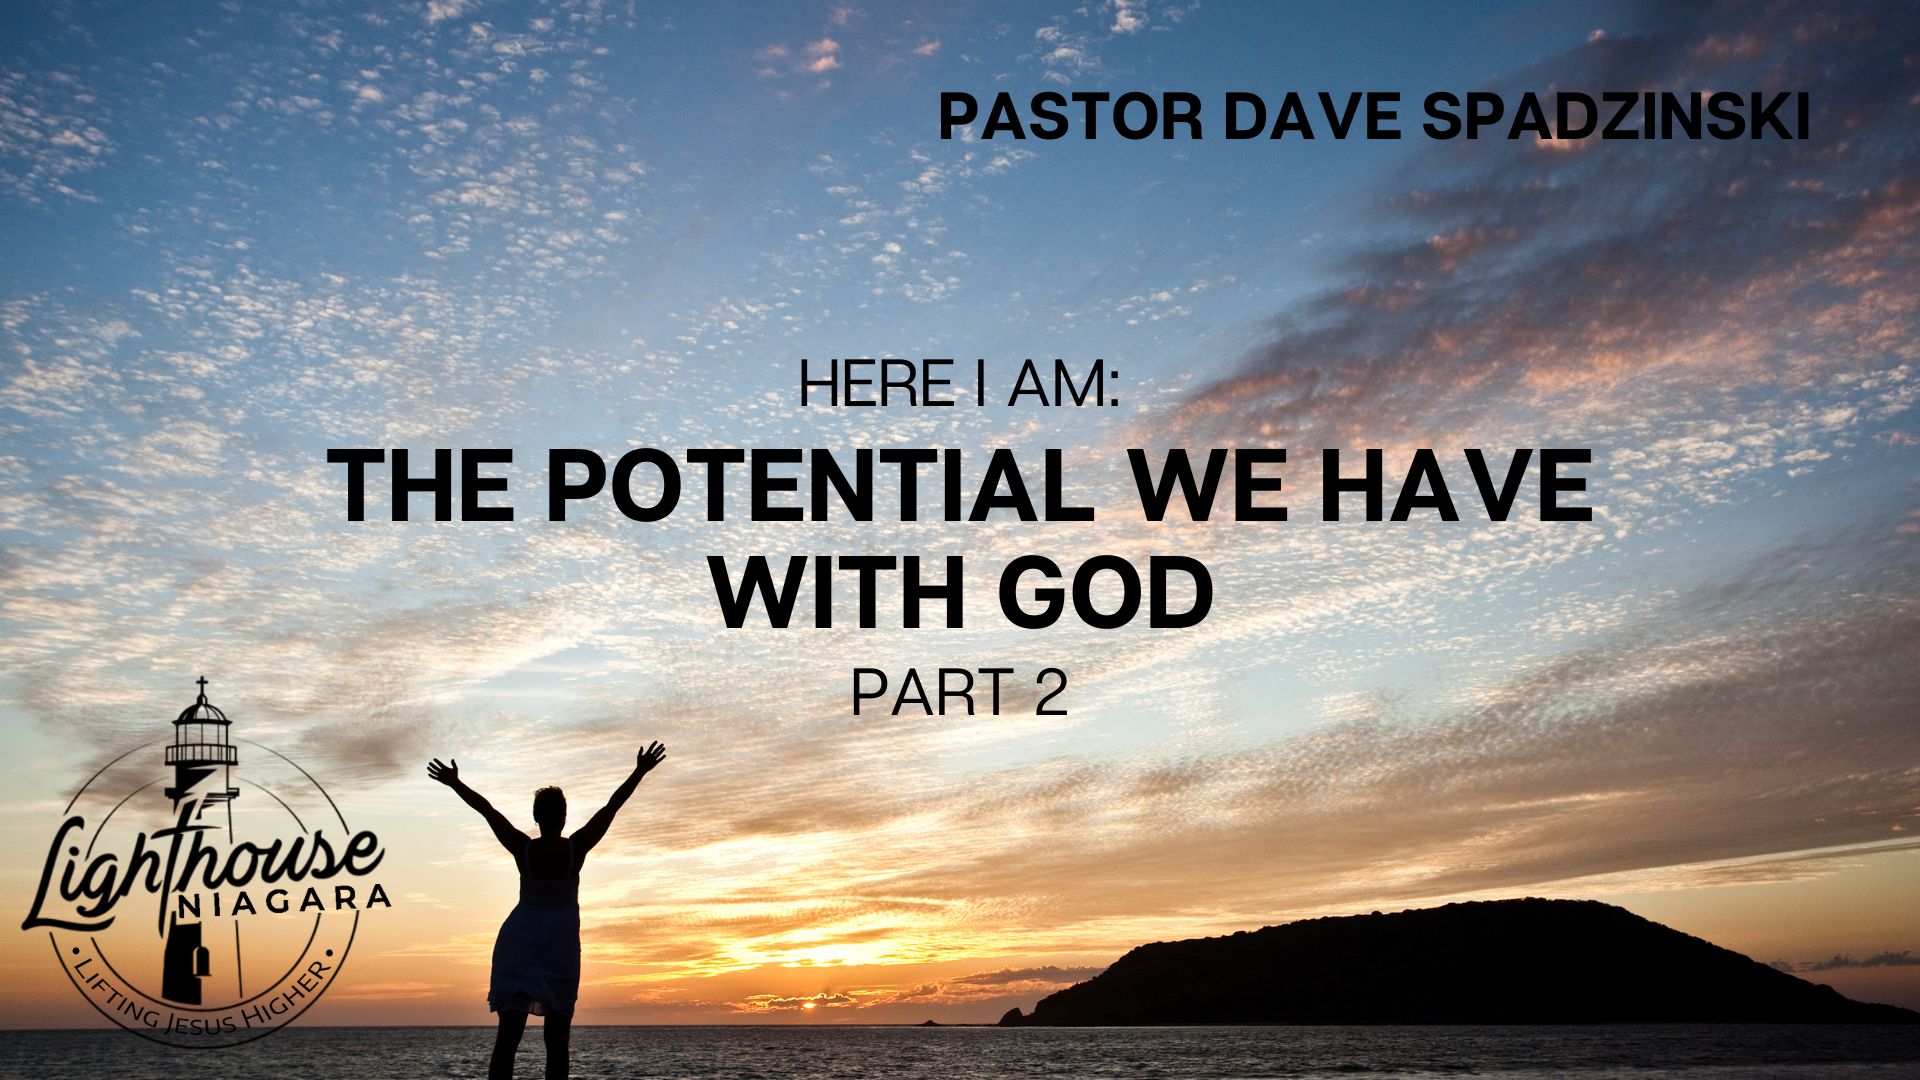 Here I Am: The Potential We Have with God - Pastor Dave Spadzinski